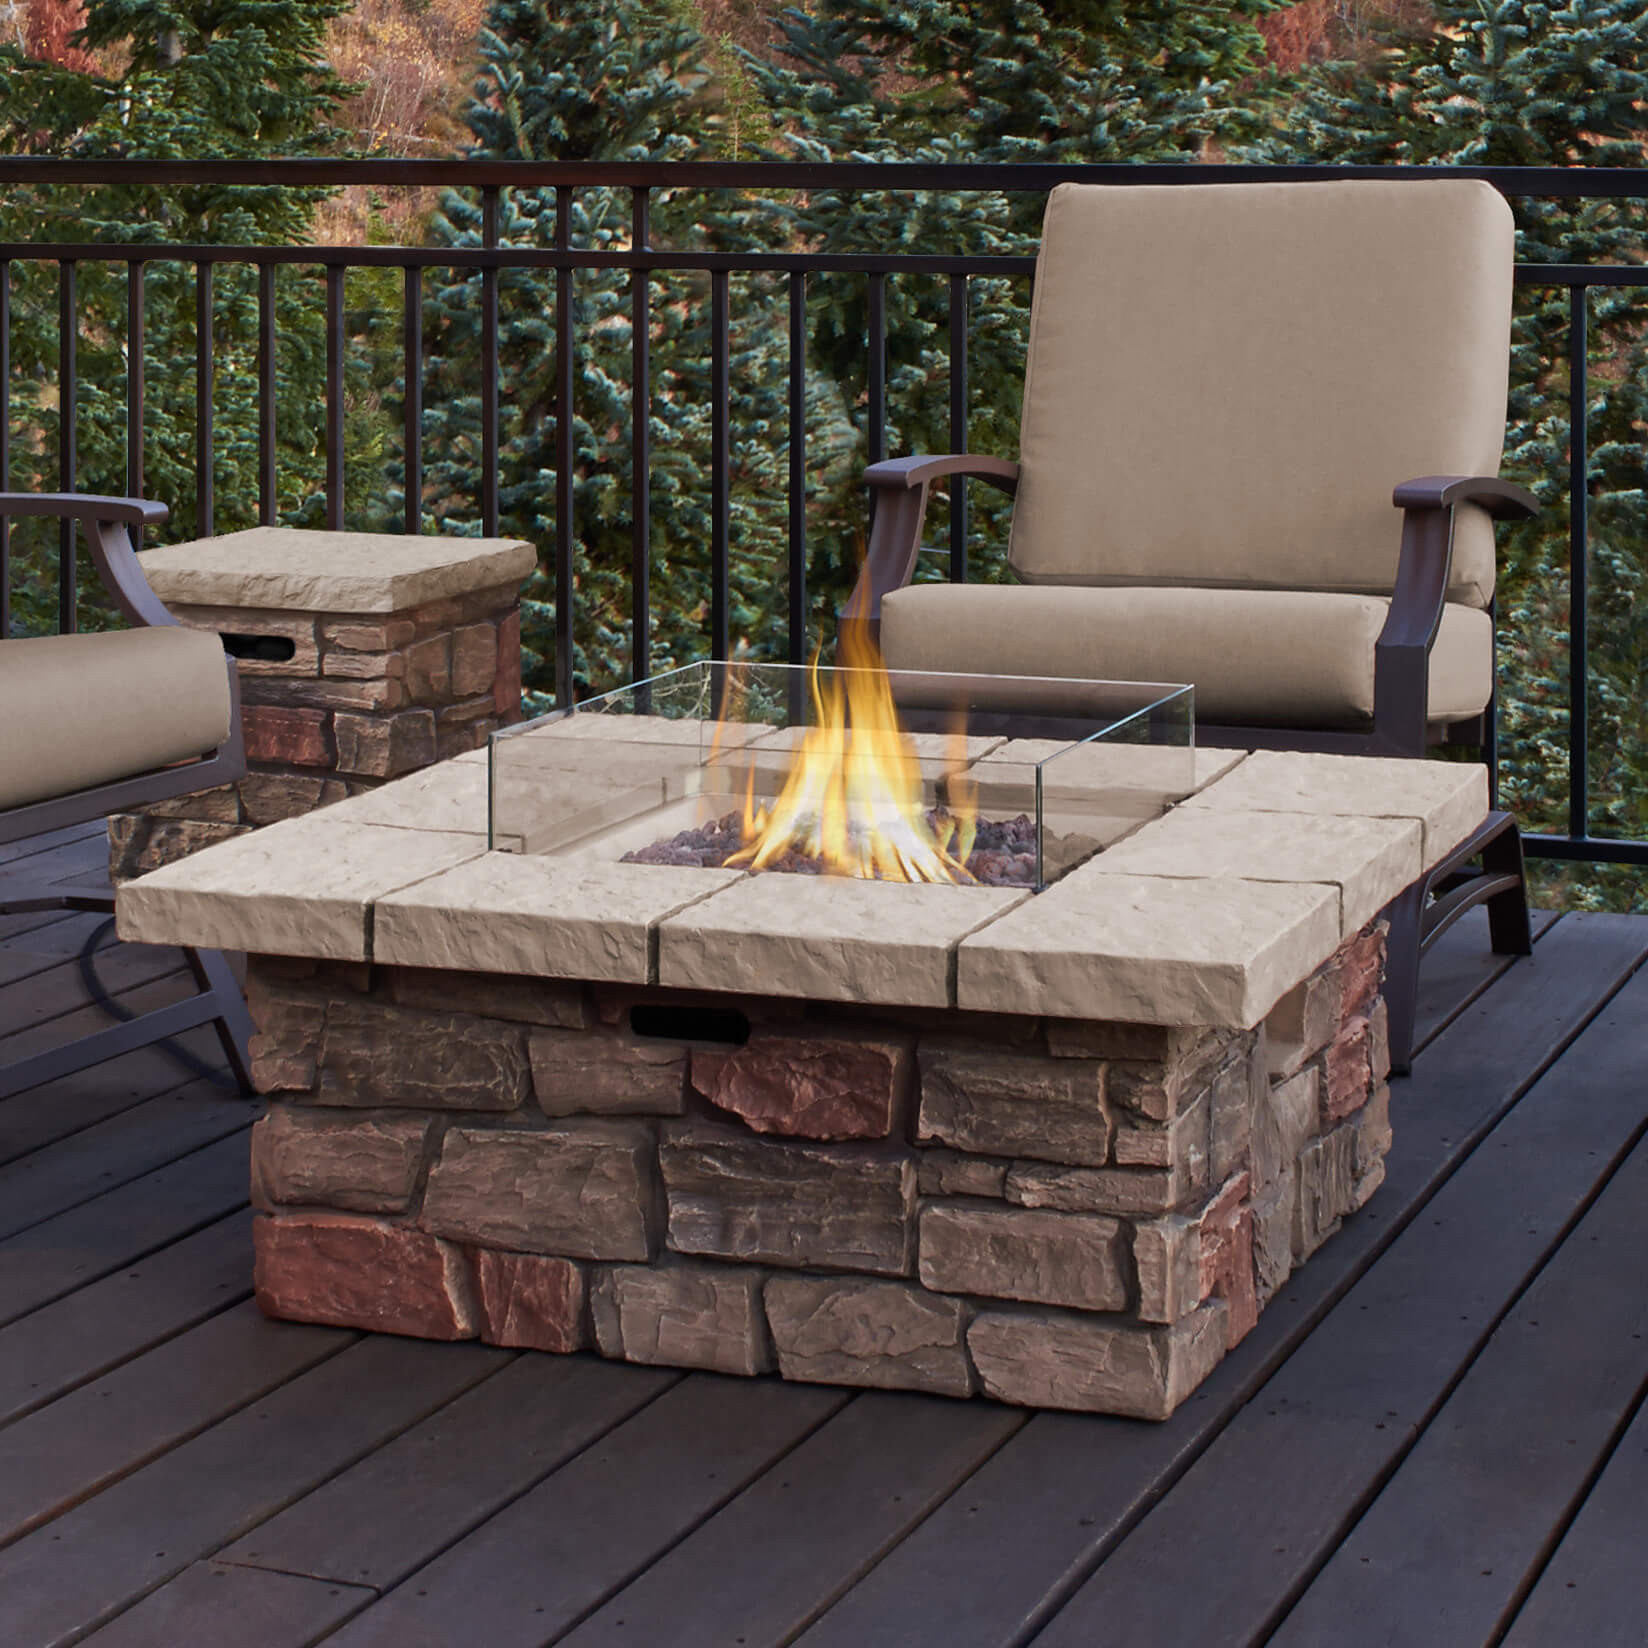 Propane Patio Fire Pit
 Top 15 Types of Propane Patio Fire Pits with Table Buying